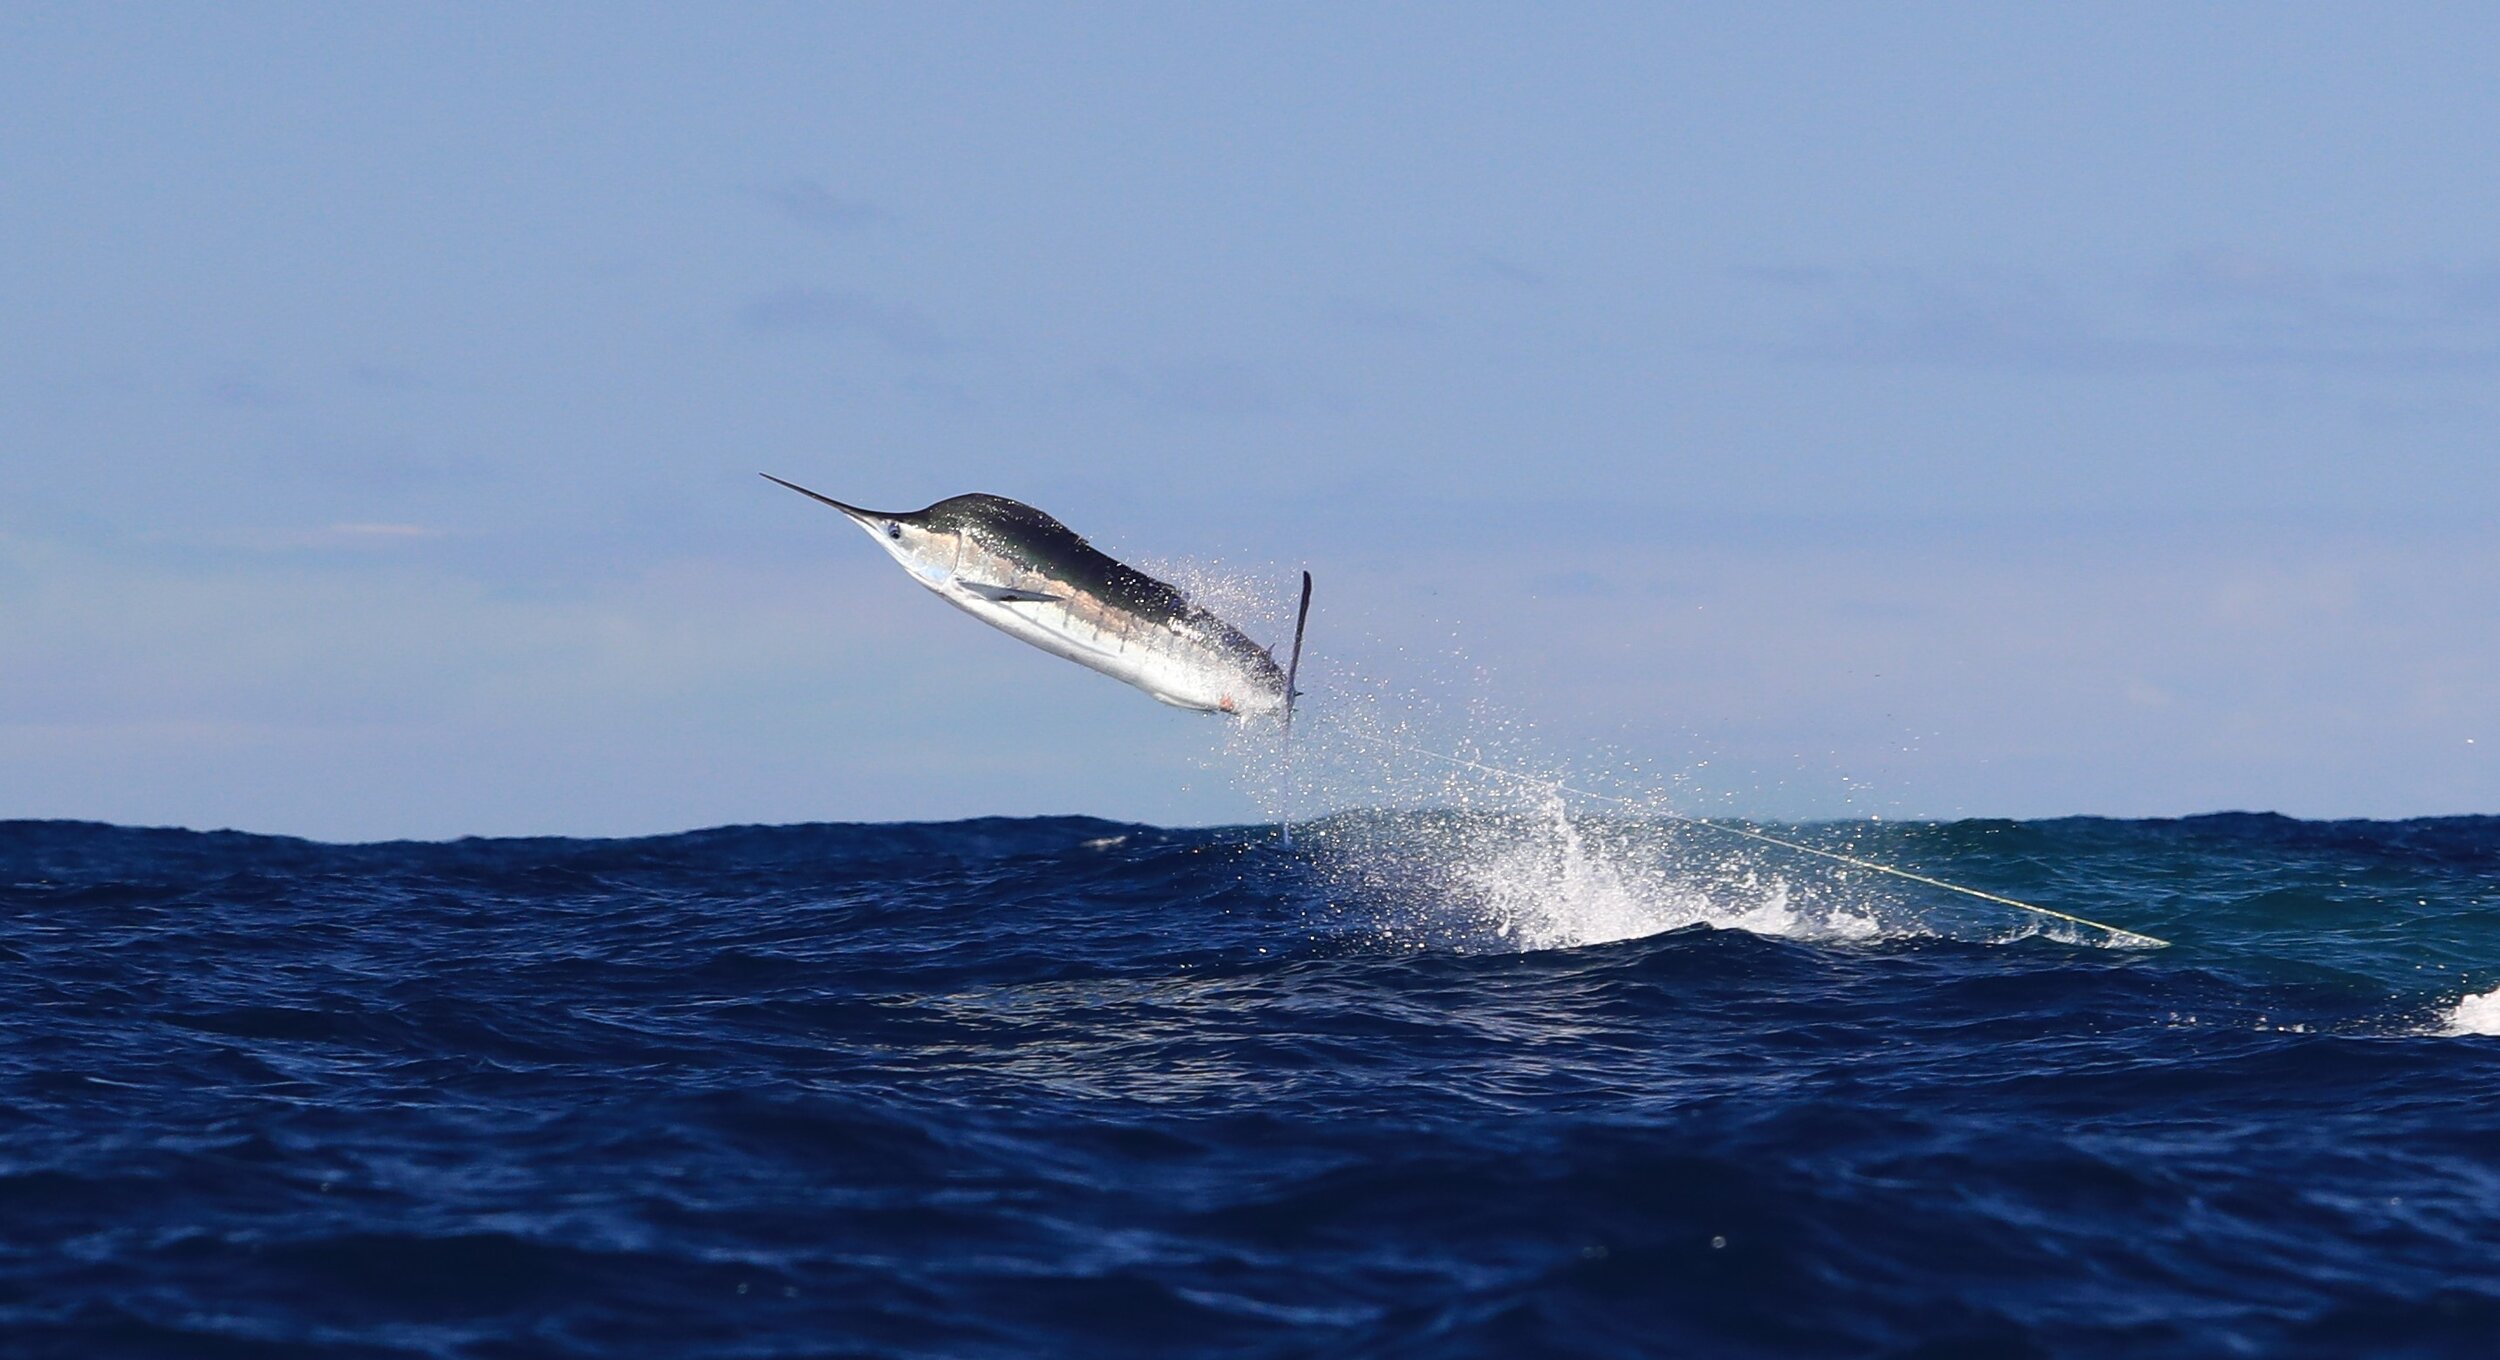 A striped marlin darting from the ocean off the East Cost of Australia - From Shutterstock